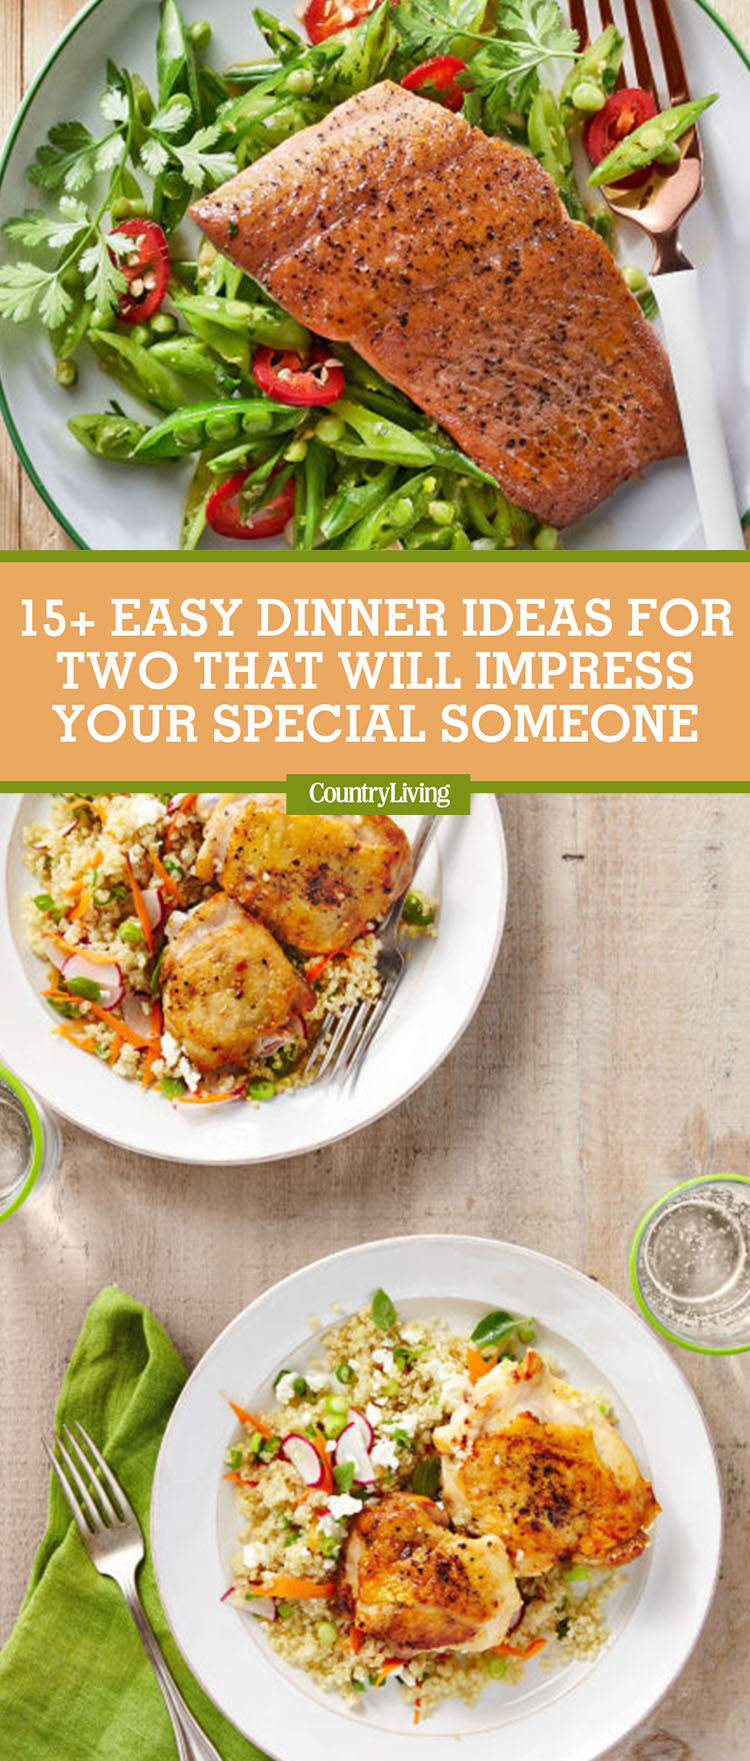 Quick Dinners For 2
 17 Easy Dinner Ideas for Two Romantic Dinner for Two Recipes